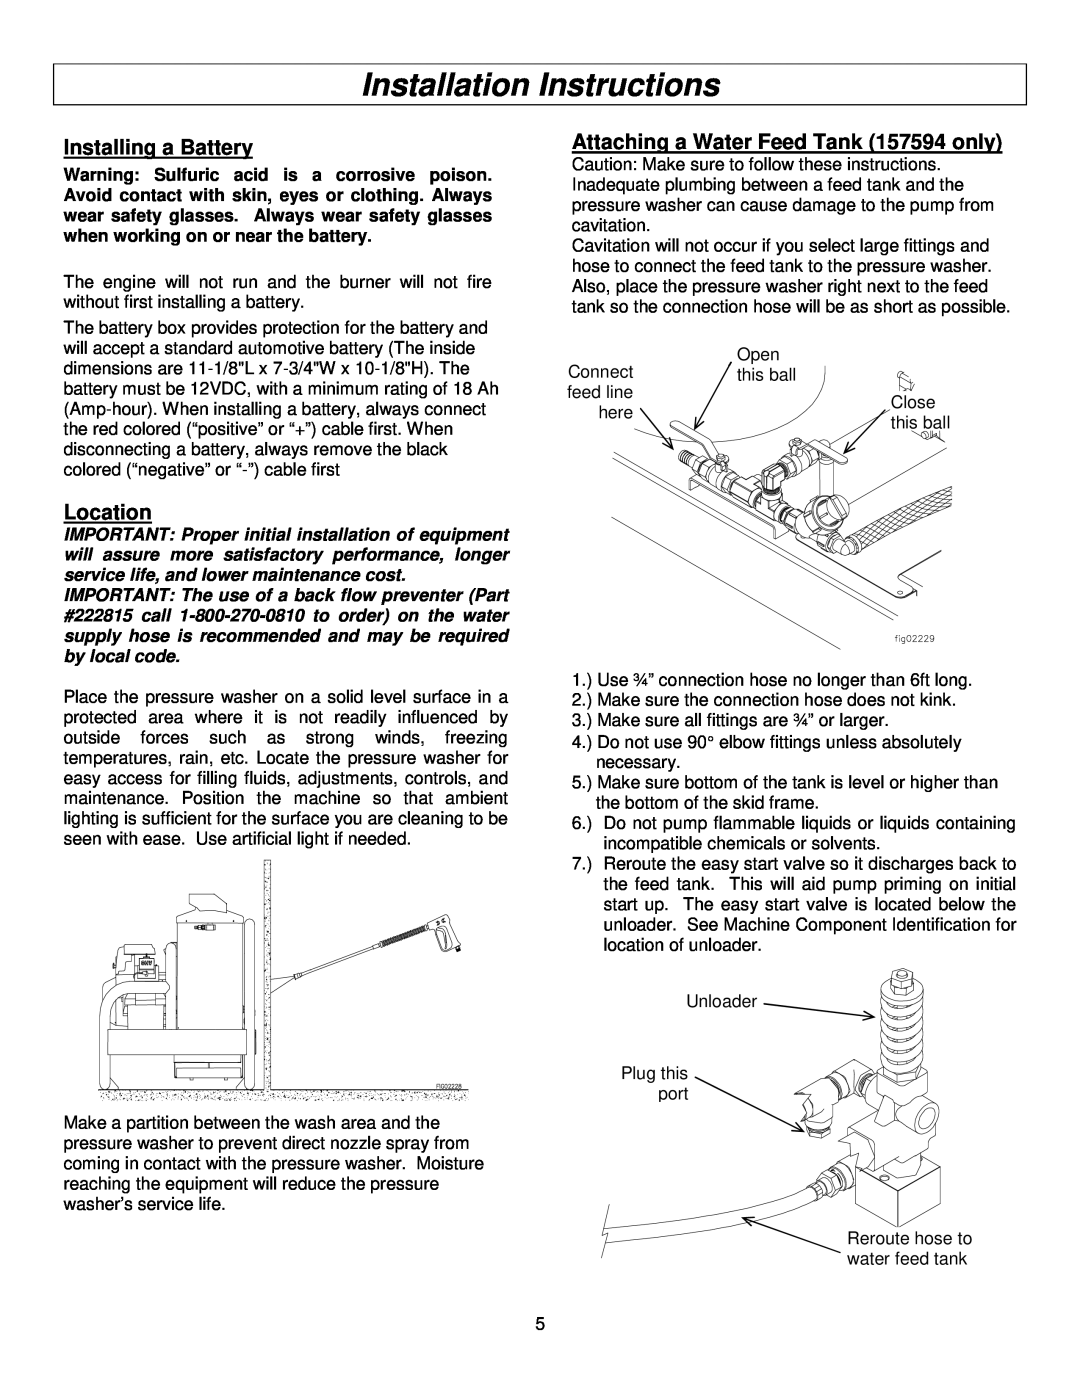 Panasonic M157594J Installation Instructions, Installing a Battery, Location, Attaching a Water Feed Tank 157594 only 